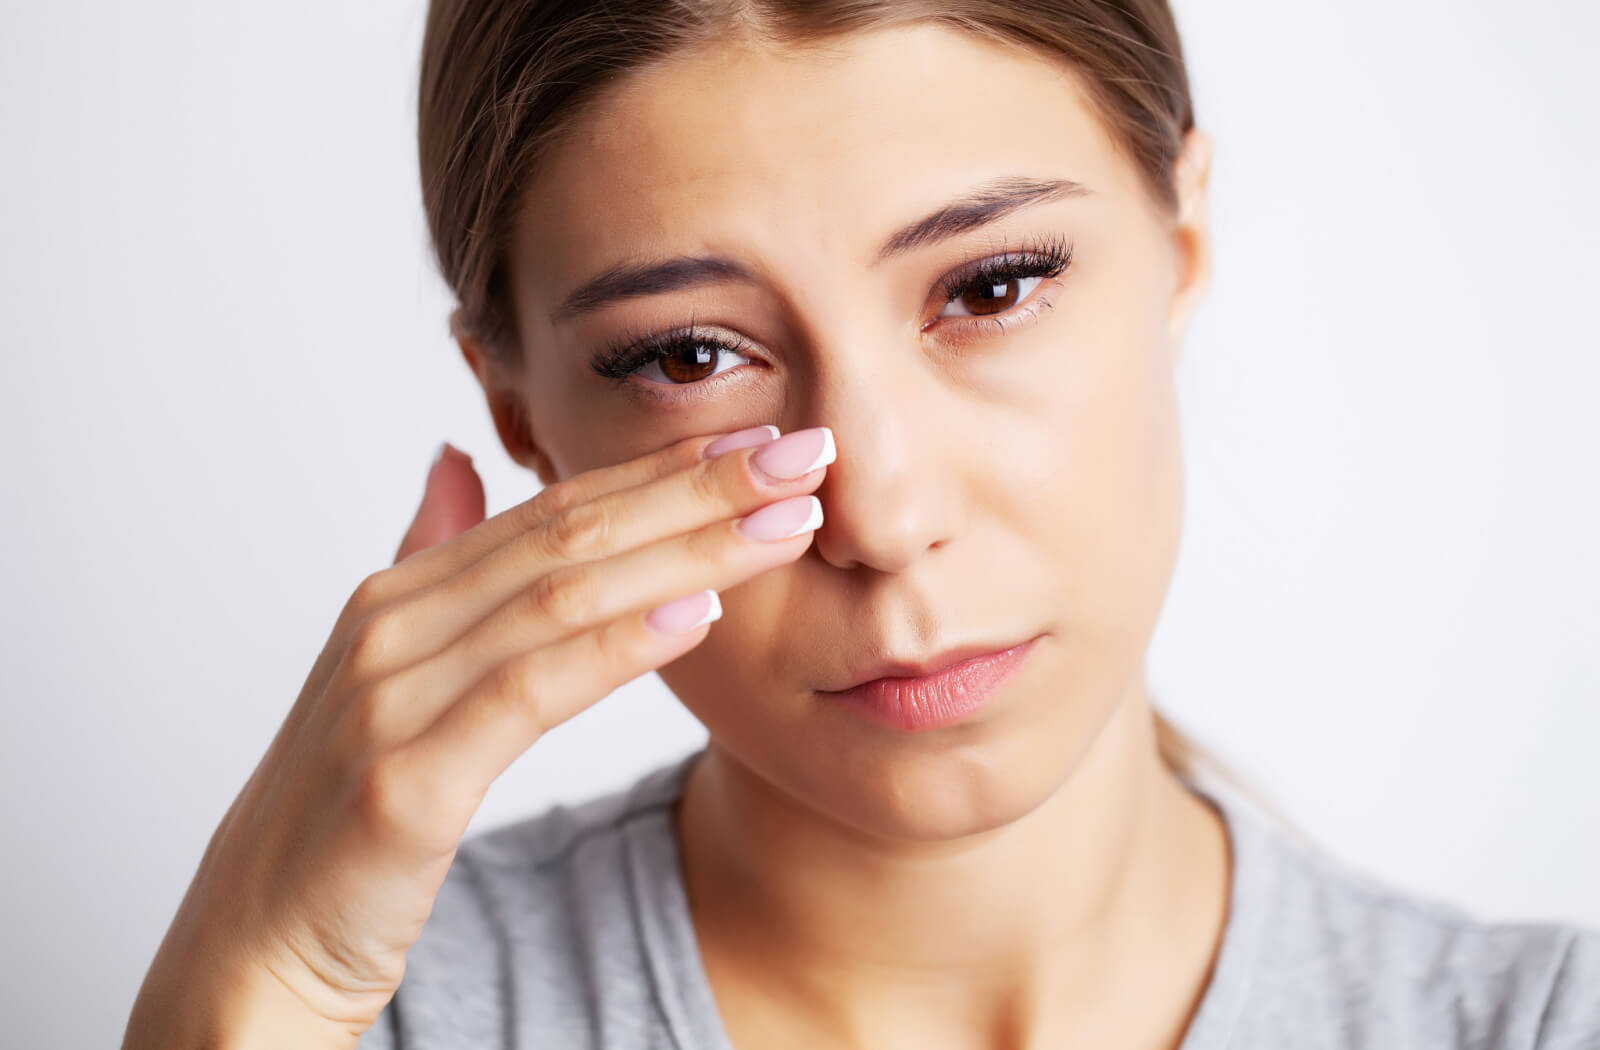 A woman experiencing moderate to severe eye pain due to not replacing expired contact lenses.